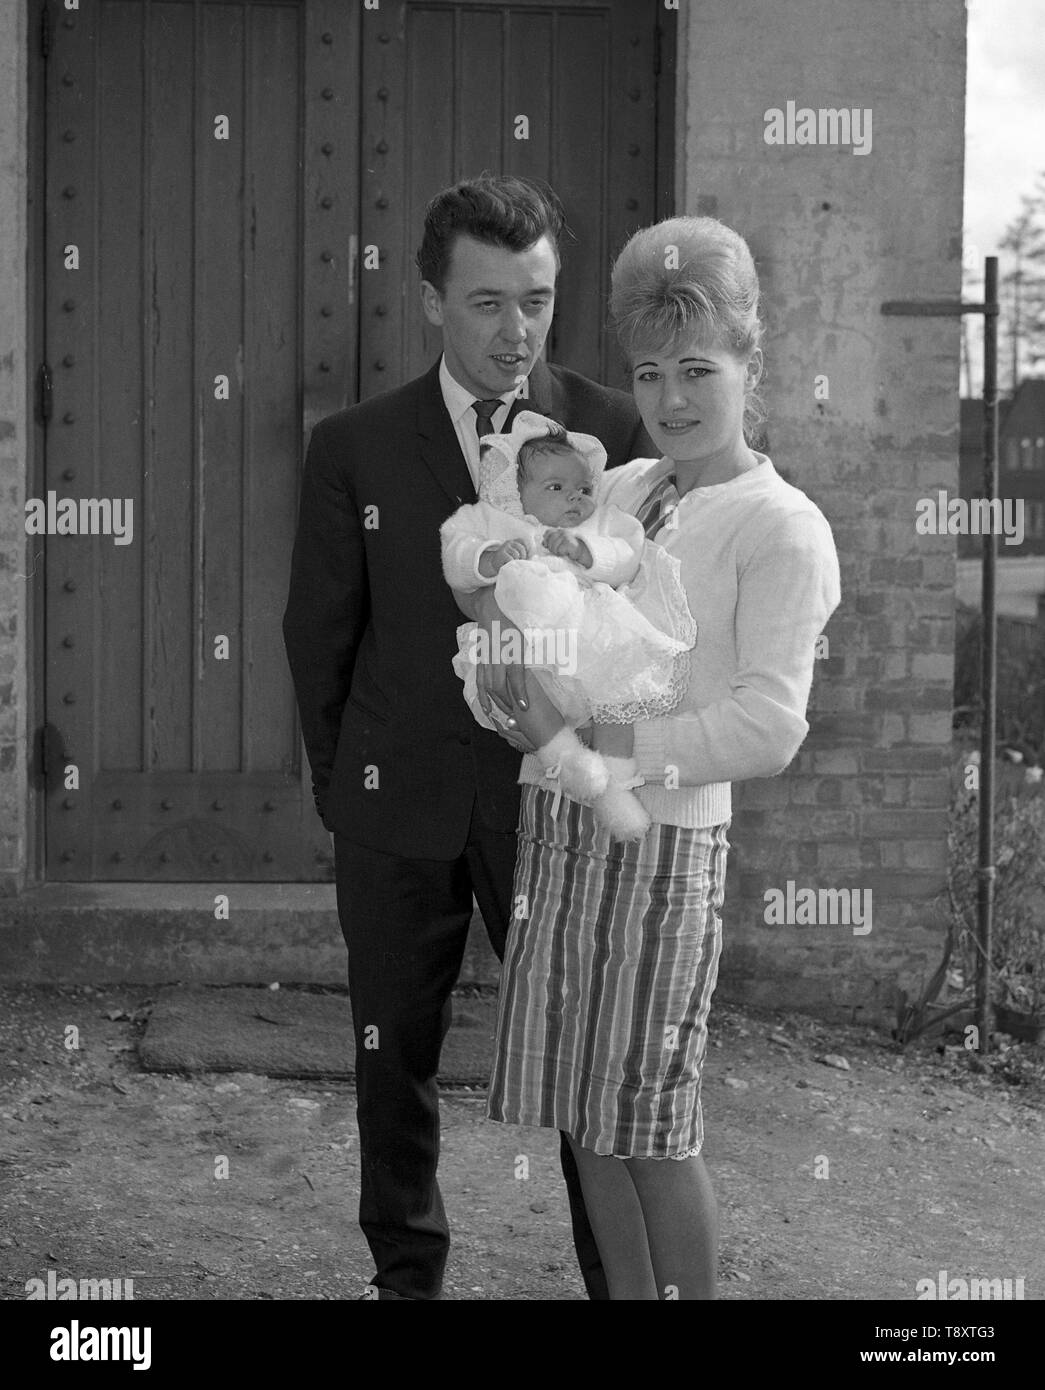 A Baby Christening in the UK c1962  Parents and baby  Photo by Tony Henshaw Stock Photo